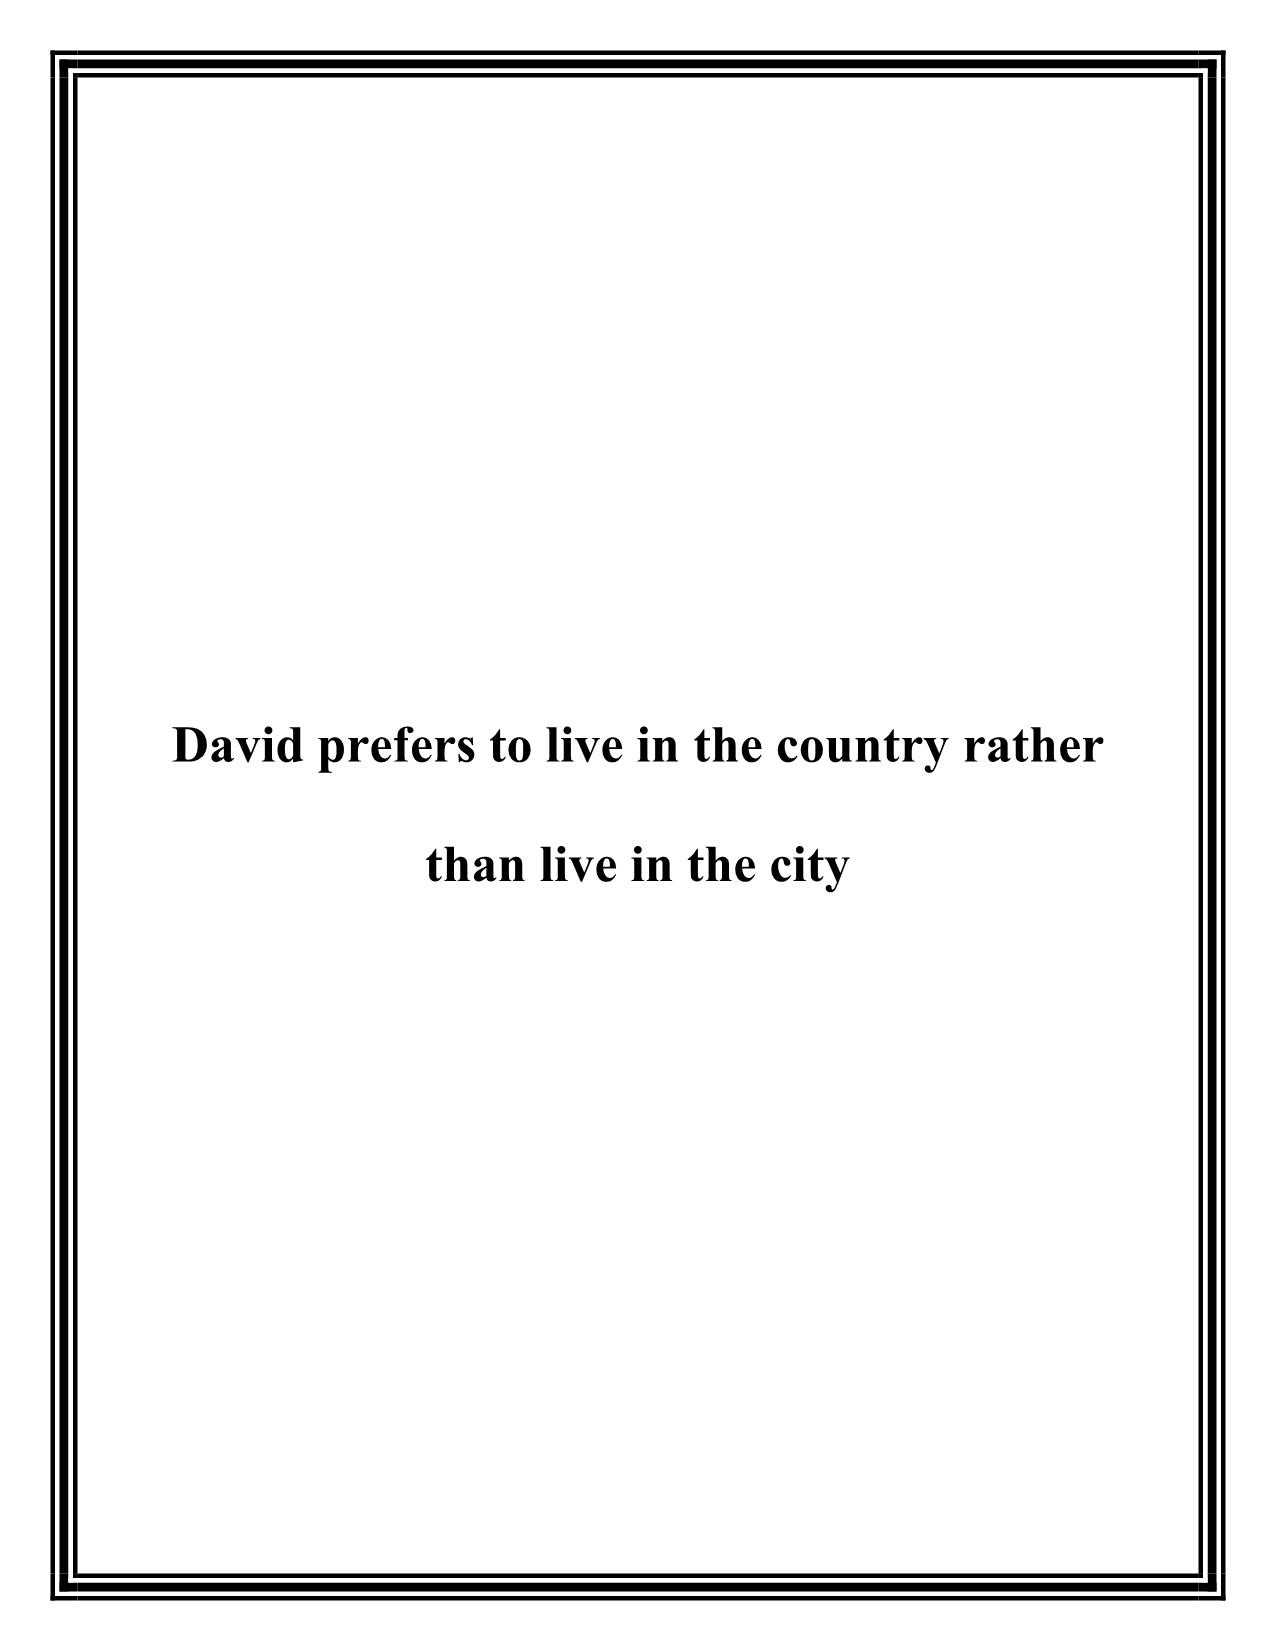 David prefers to live in the country rather than live in the city trang 1